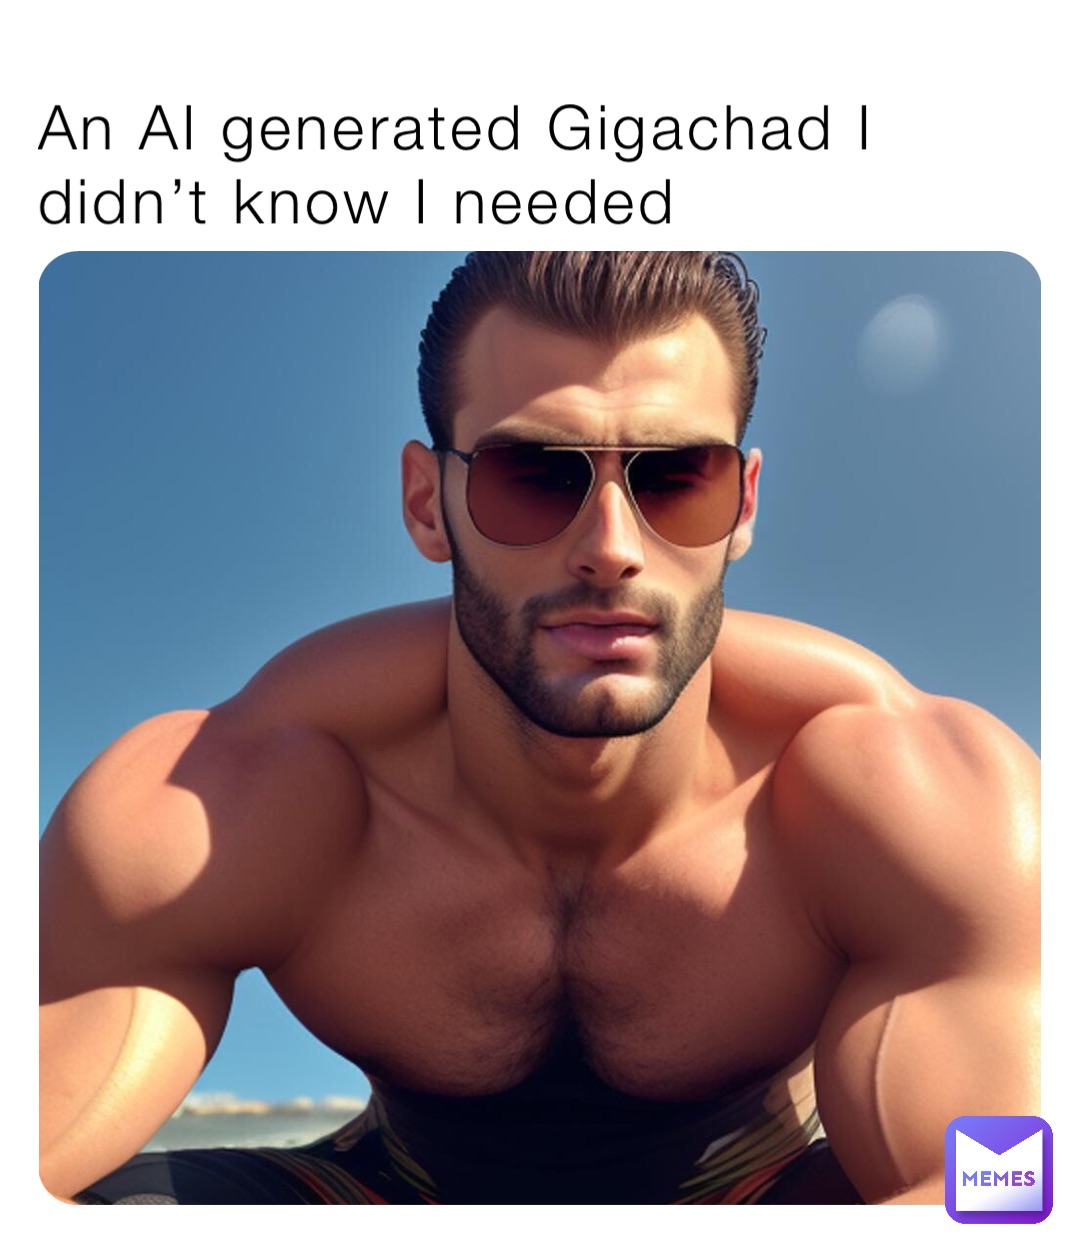 An AI generated Gigachad I didn’t know I needed